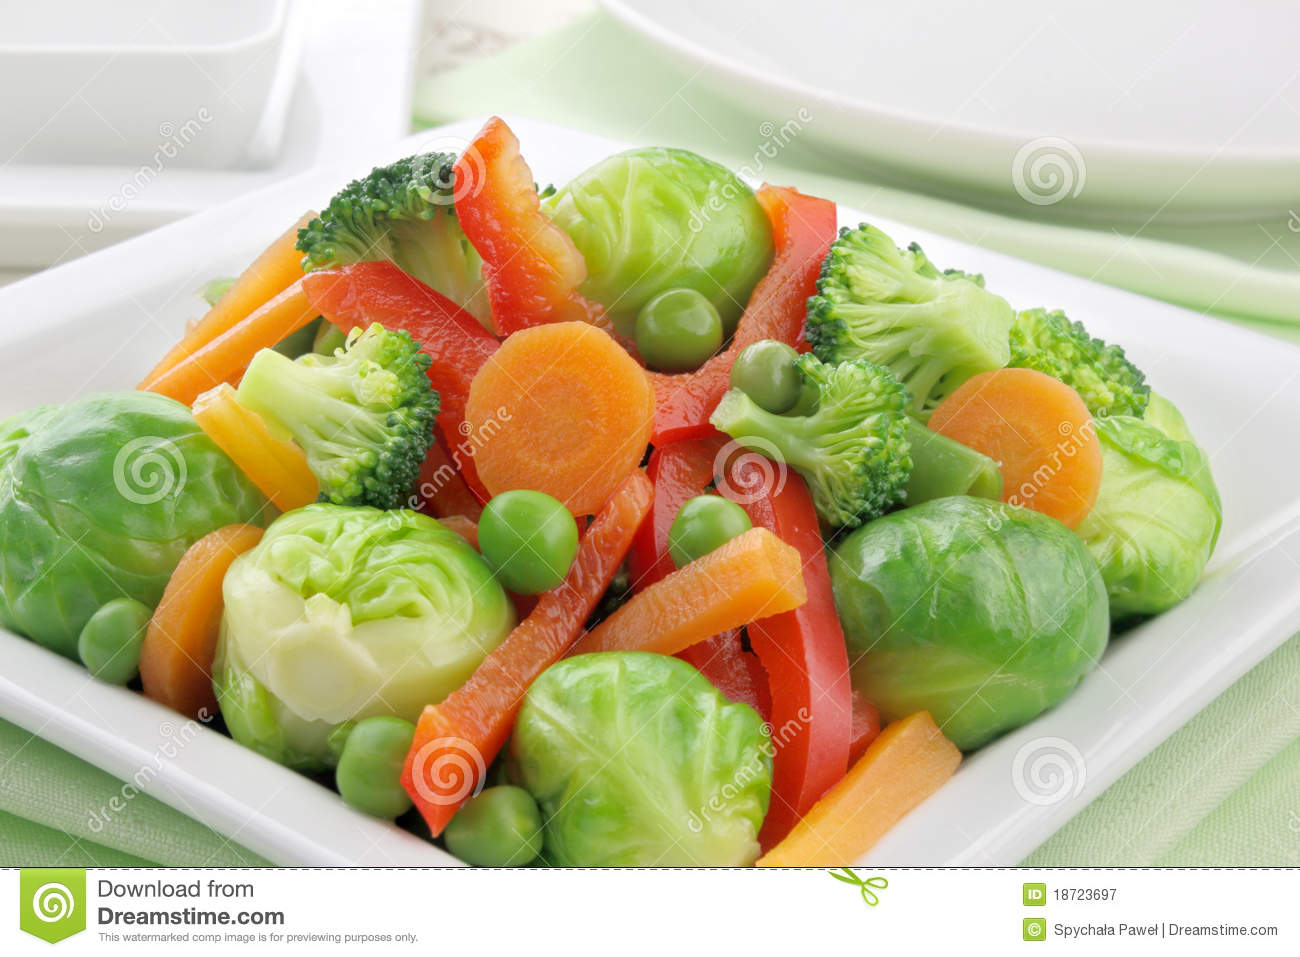 Cooked Vegetables Royalty Free Stock Photography   Image  18723697